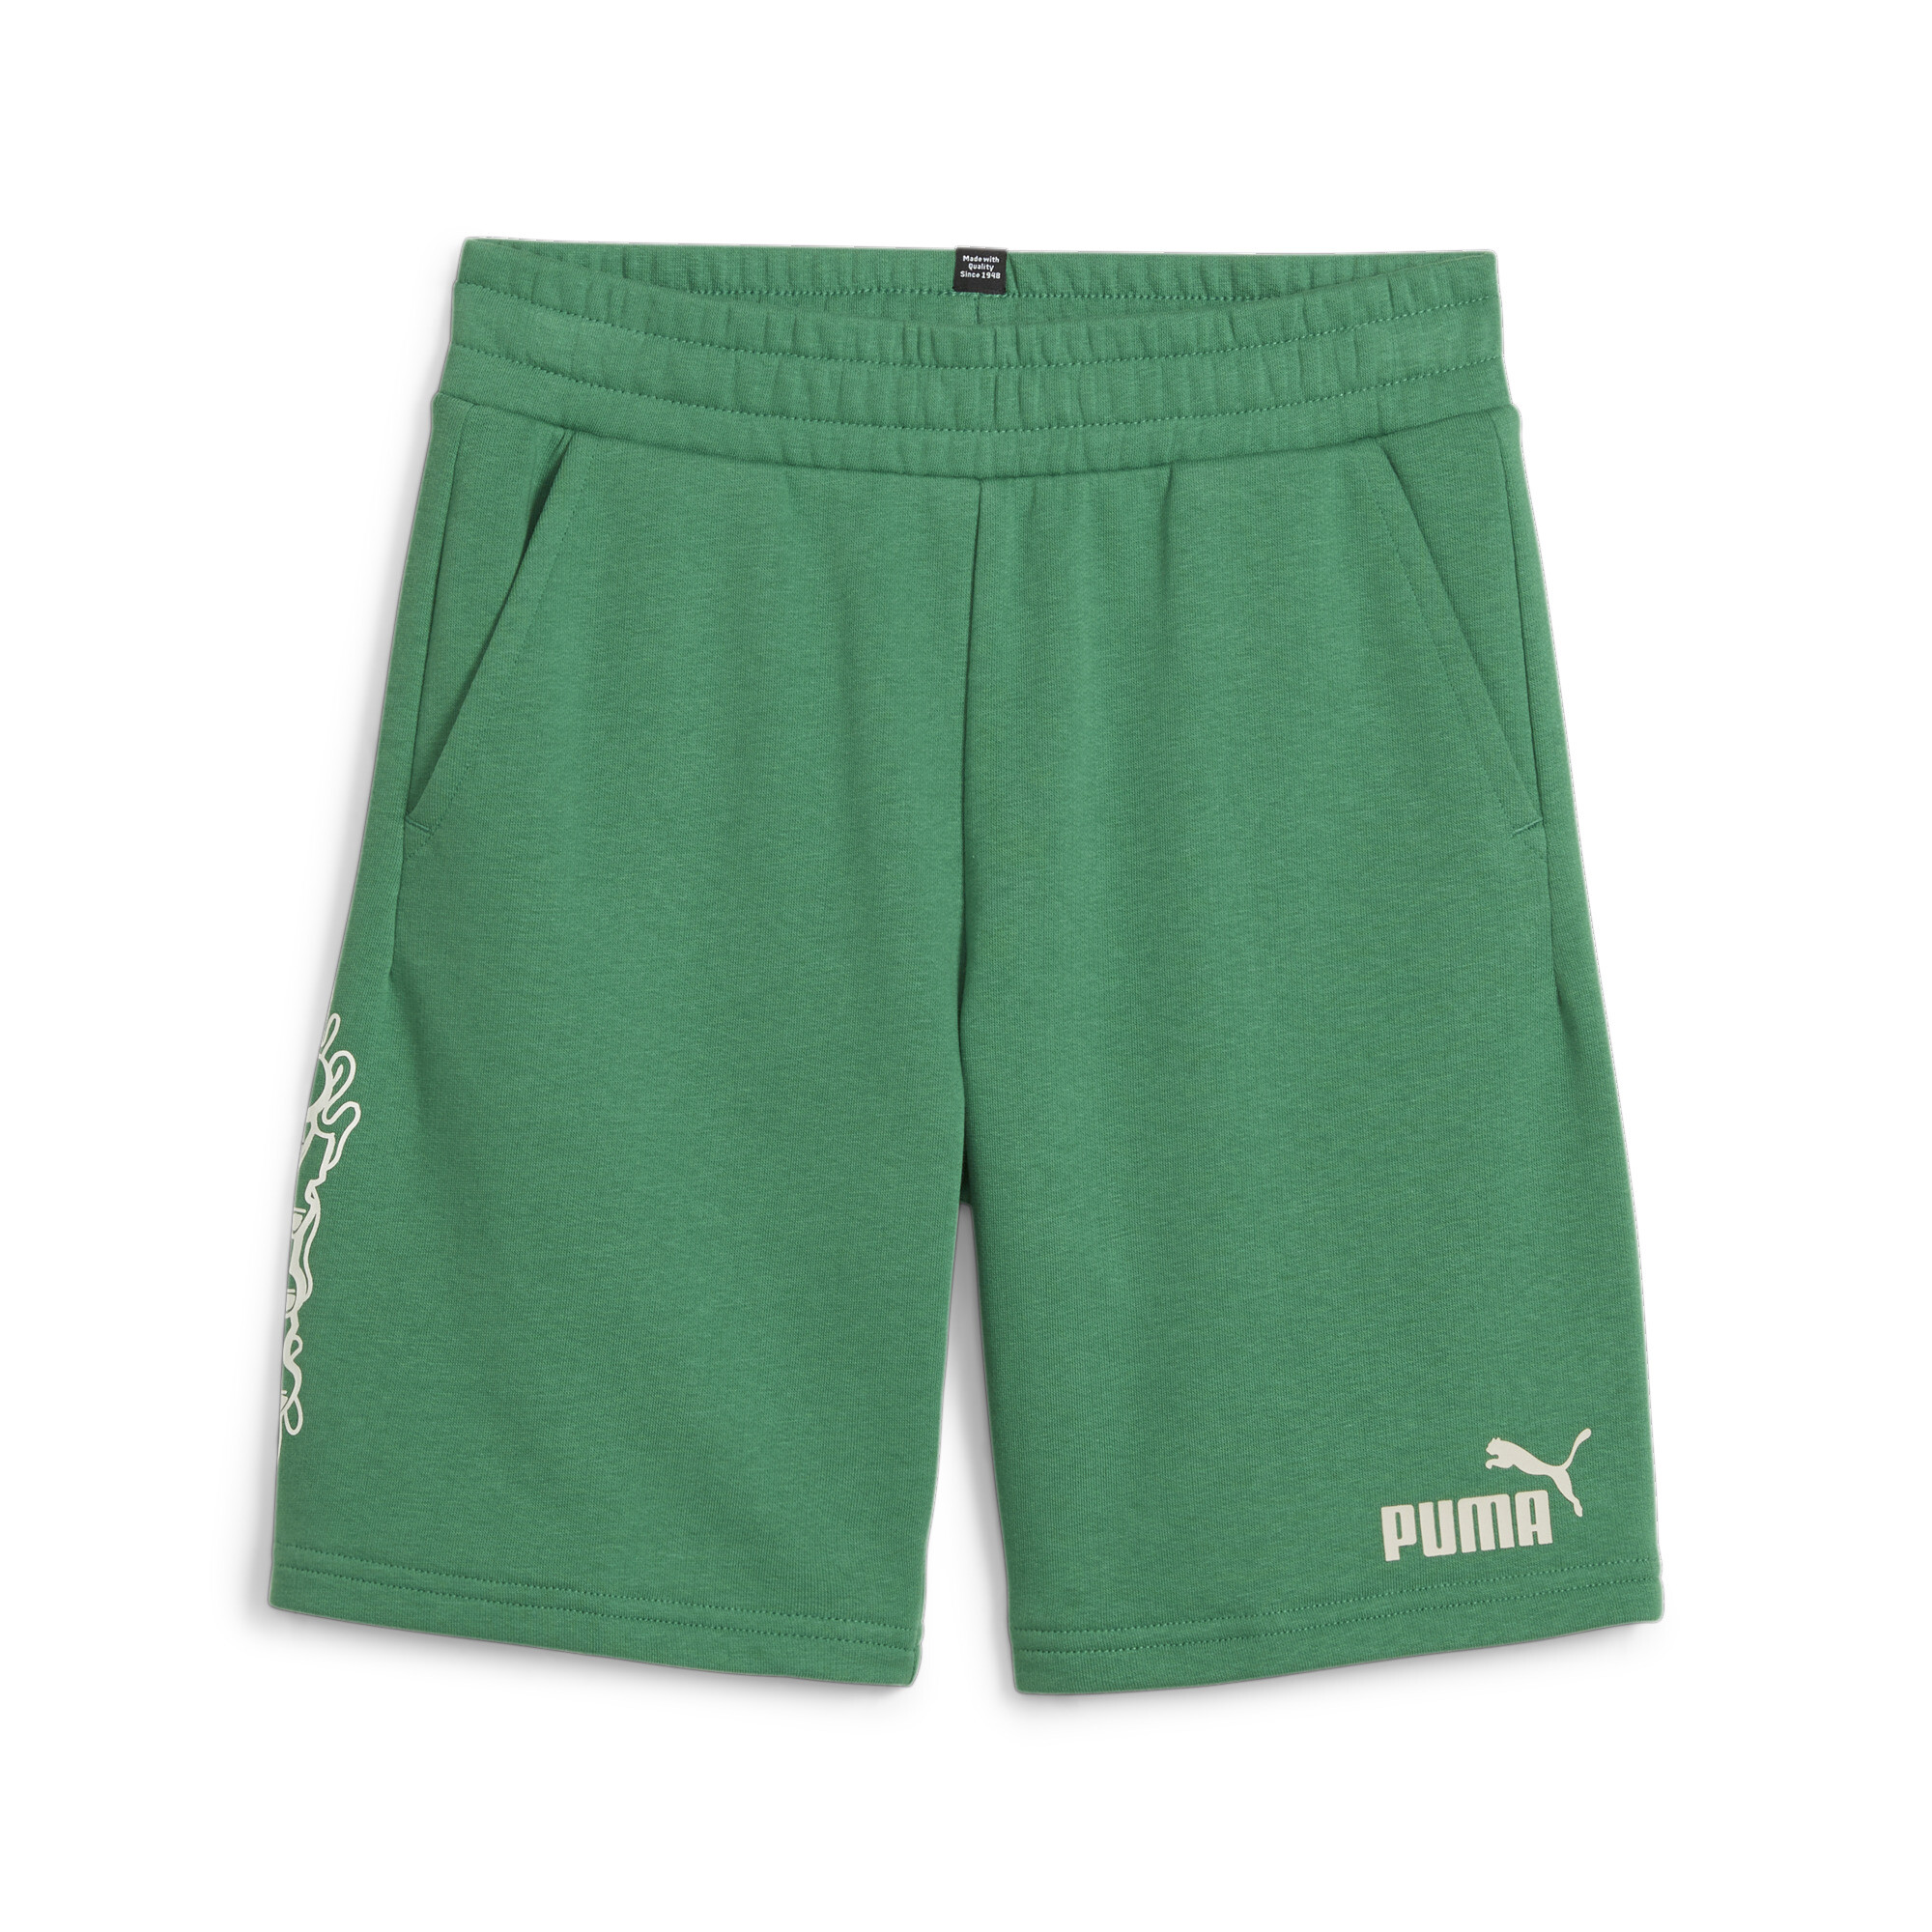 Men's Puma ESS+ Mid 90s Youth Shorts, Green, Size 7-8Y, Age